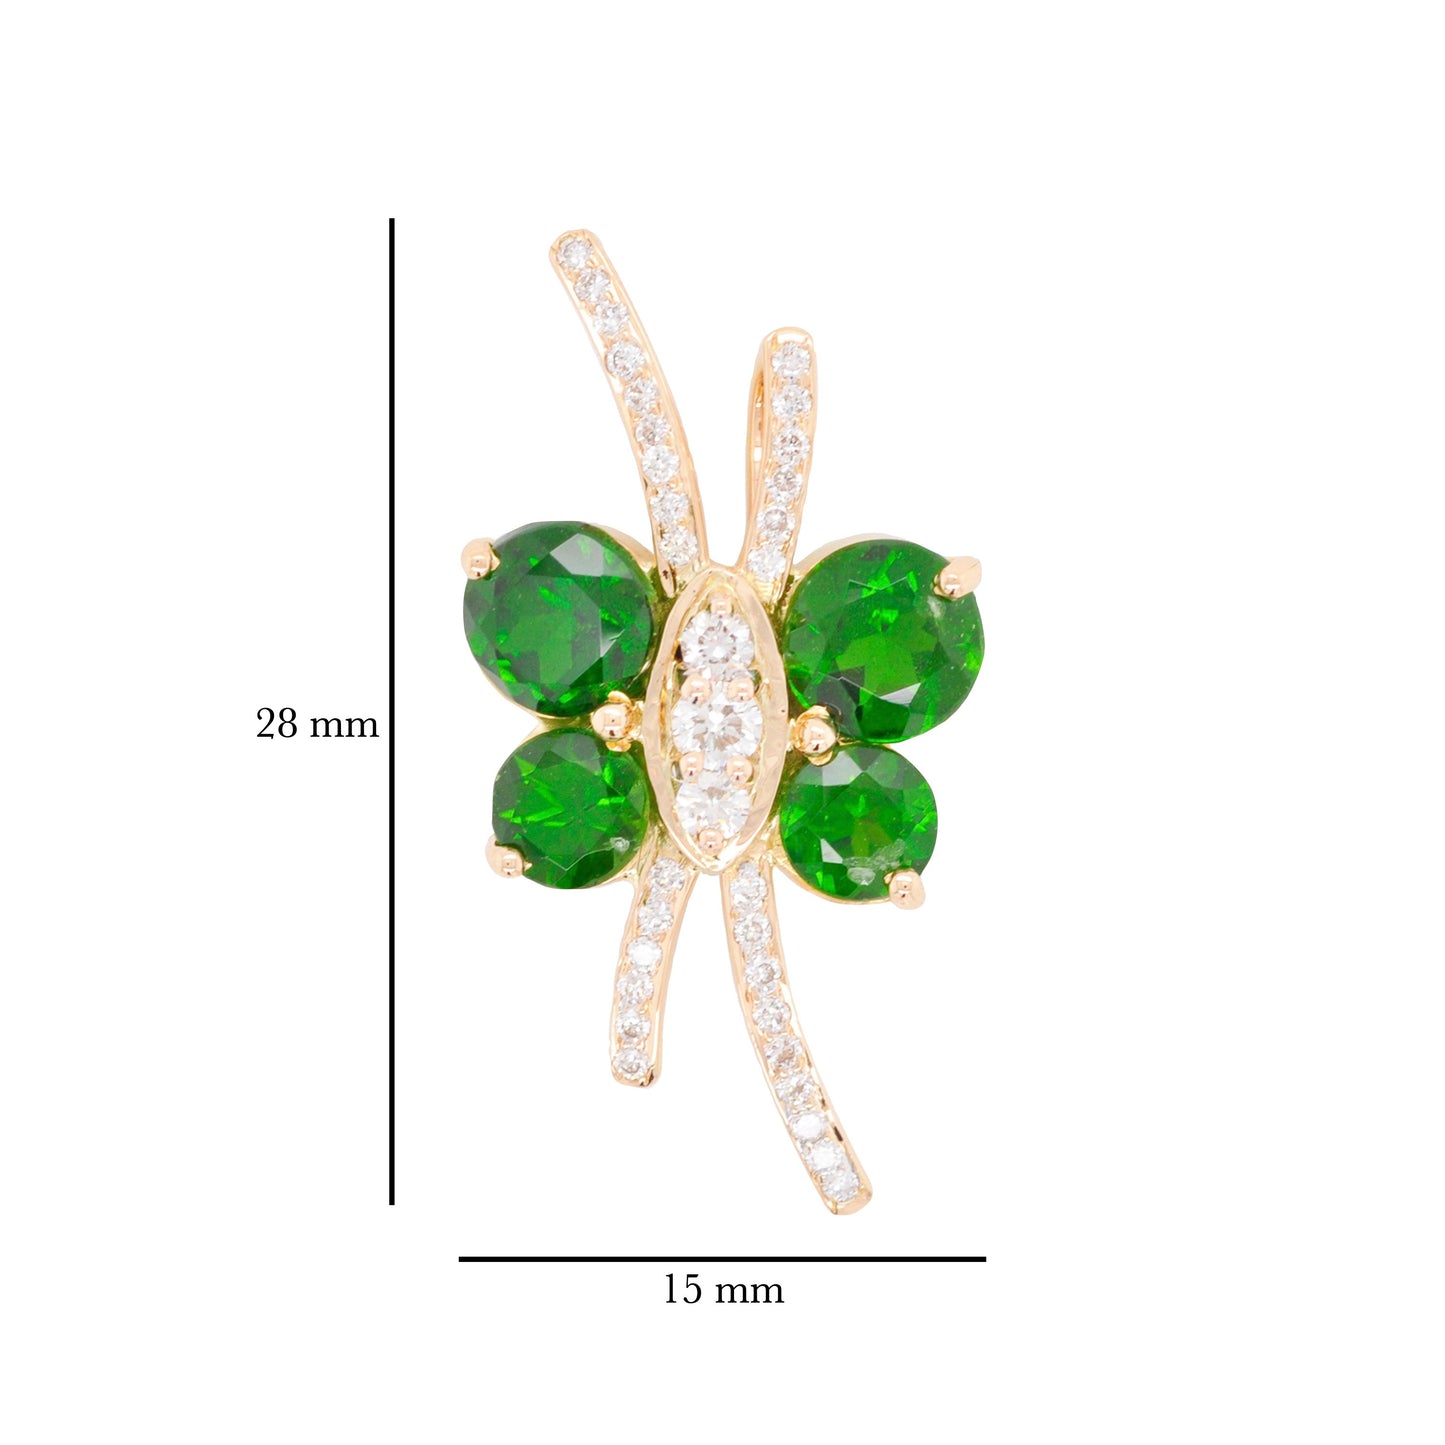 18K Gold Chrome Diopside Butterfly Diamond Pendant Necklace - Vaibhav Dhadda Jewelry